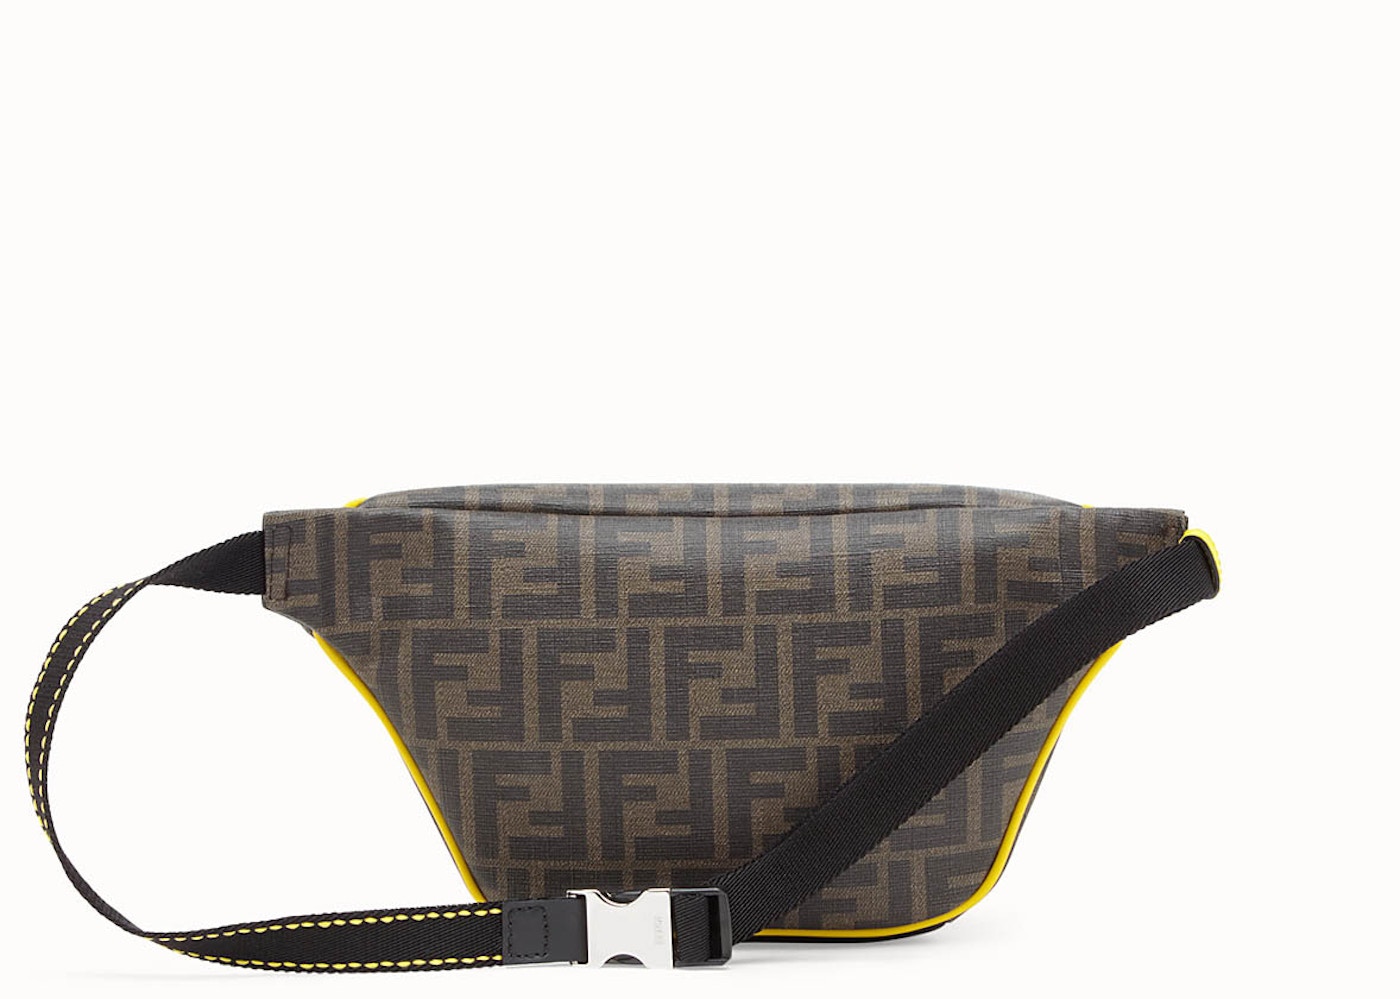 Fendi Belt Bag FF Fabric Yellow Piping Brown/Black in PU/Leather with ...